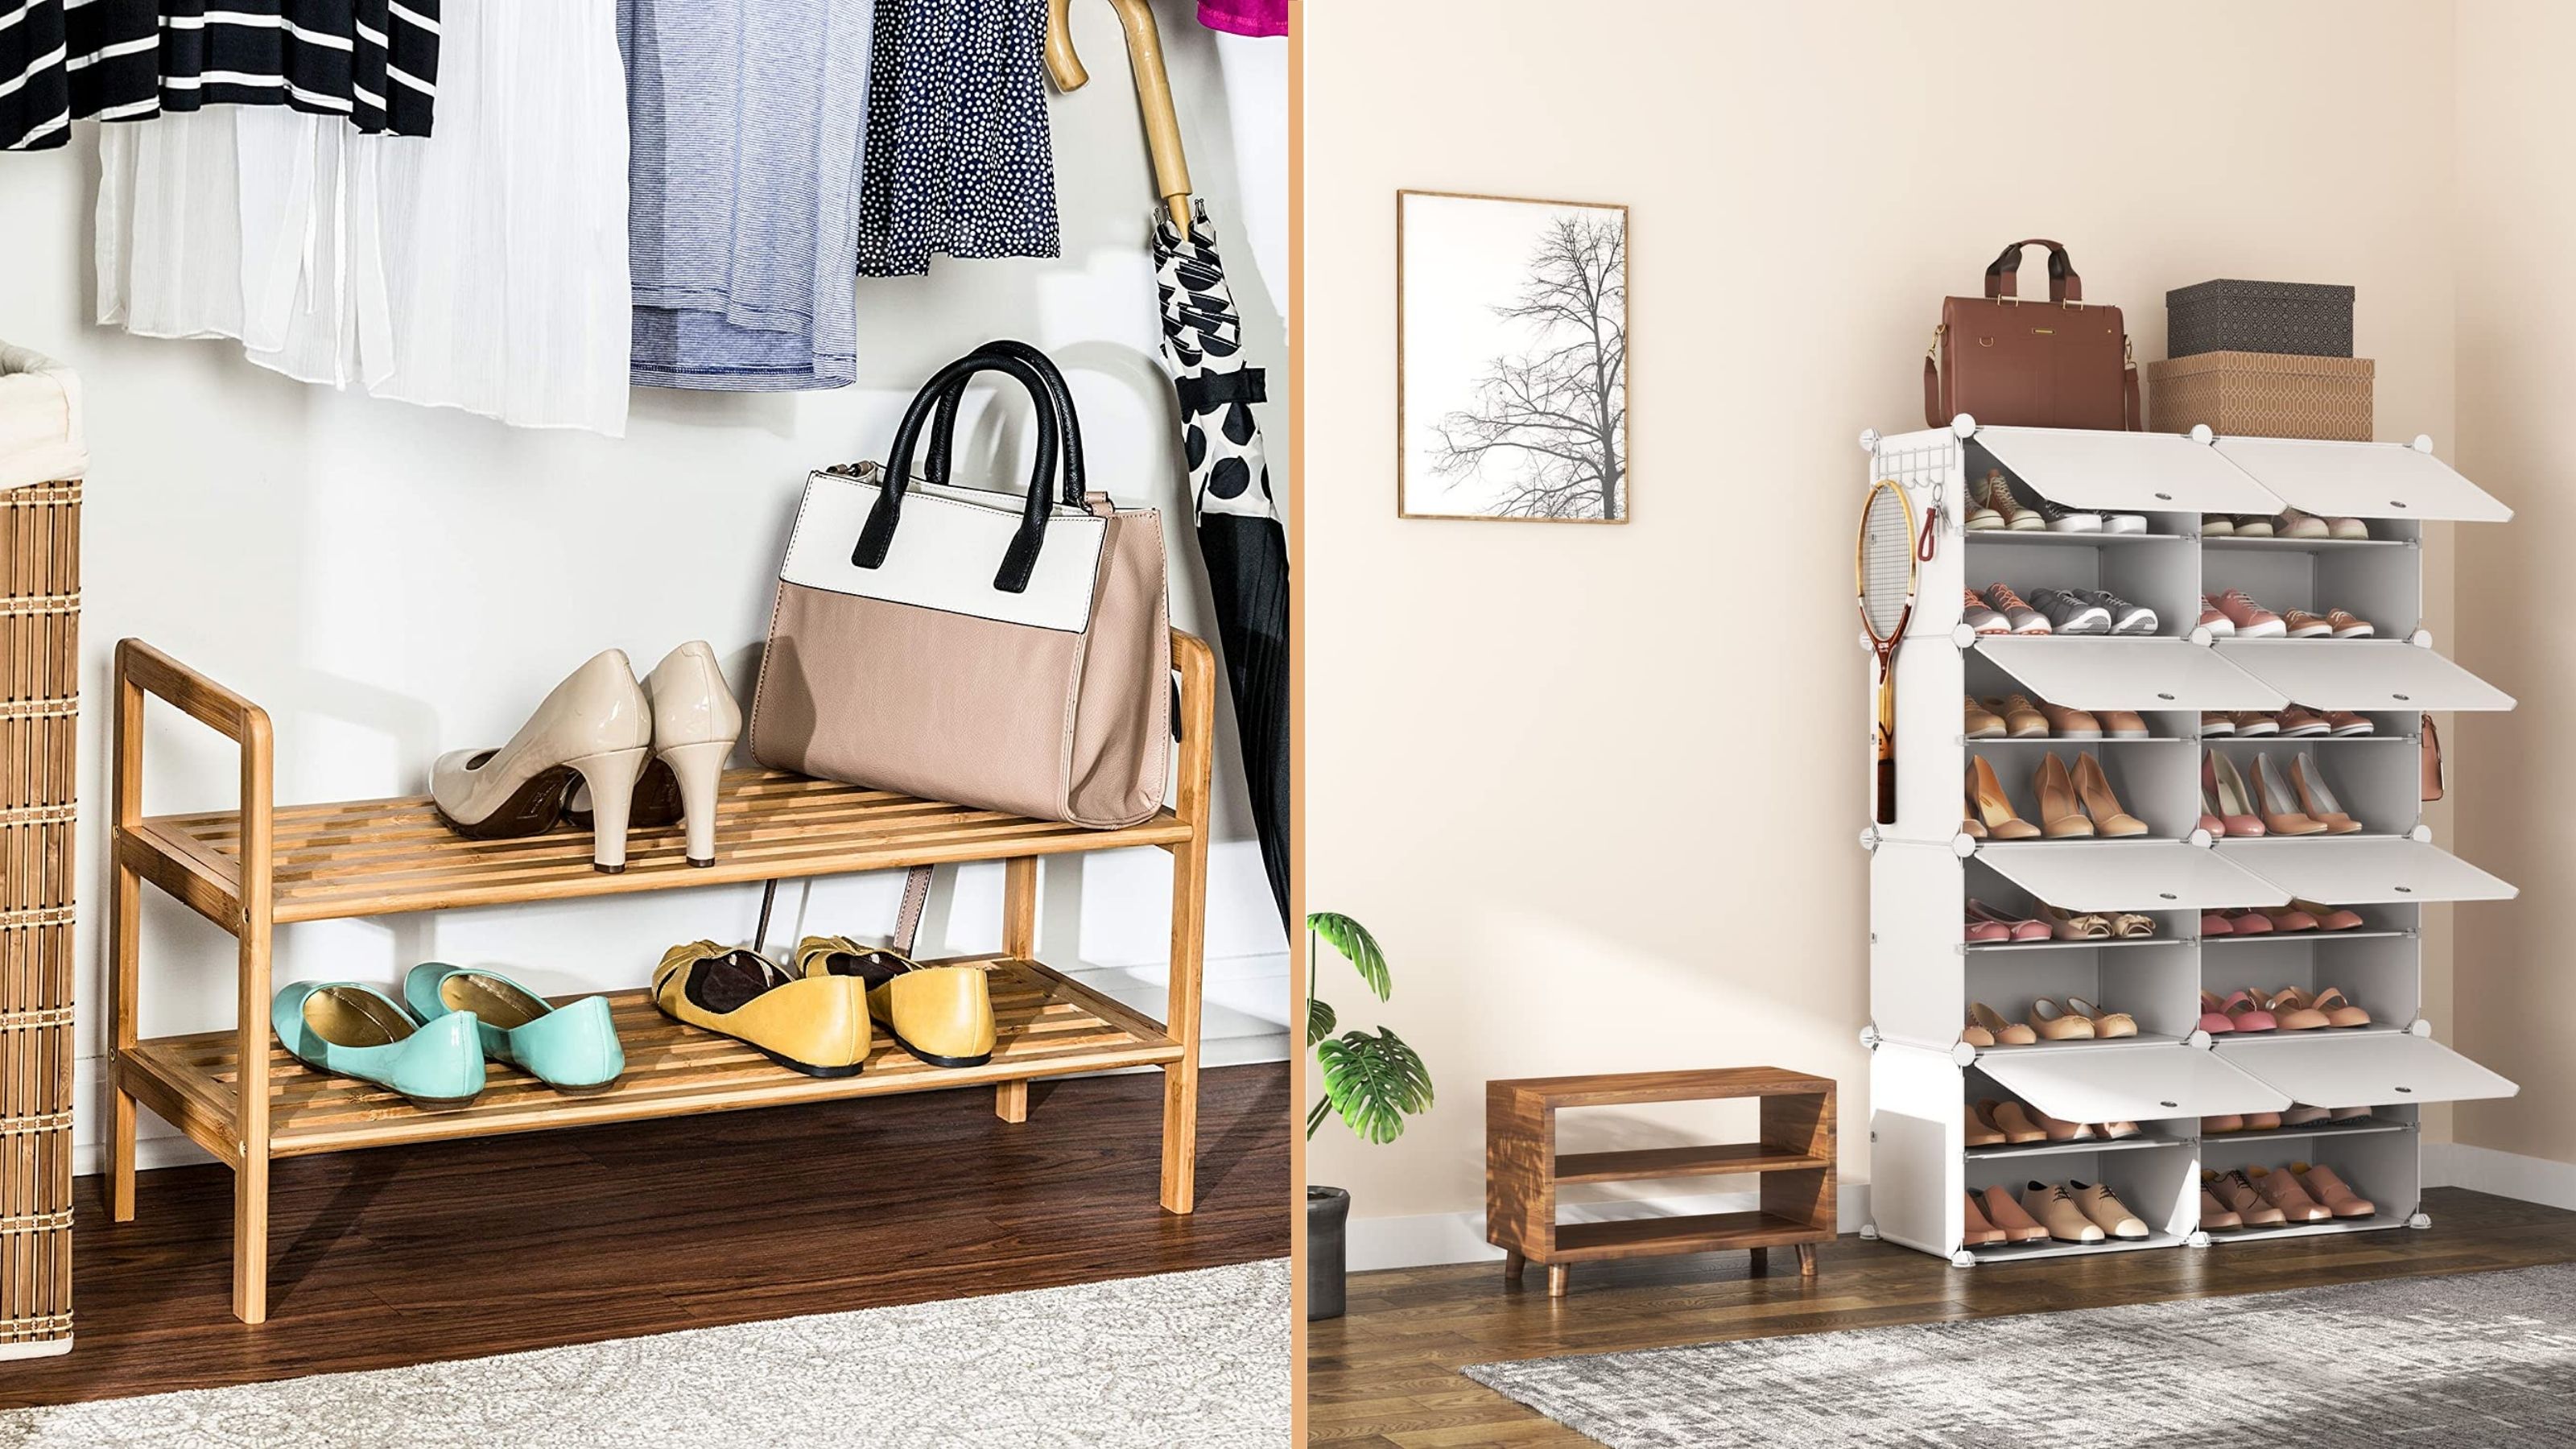 9 of the most genius shoe racks to keep your collection organized